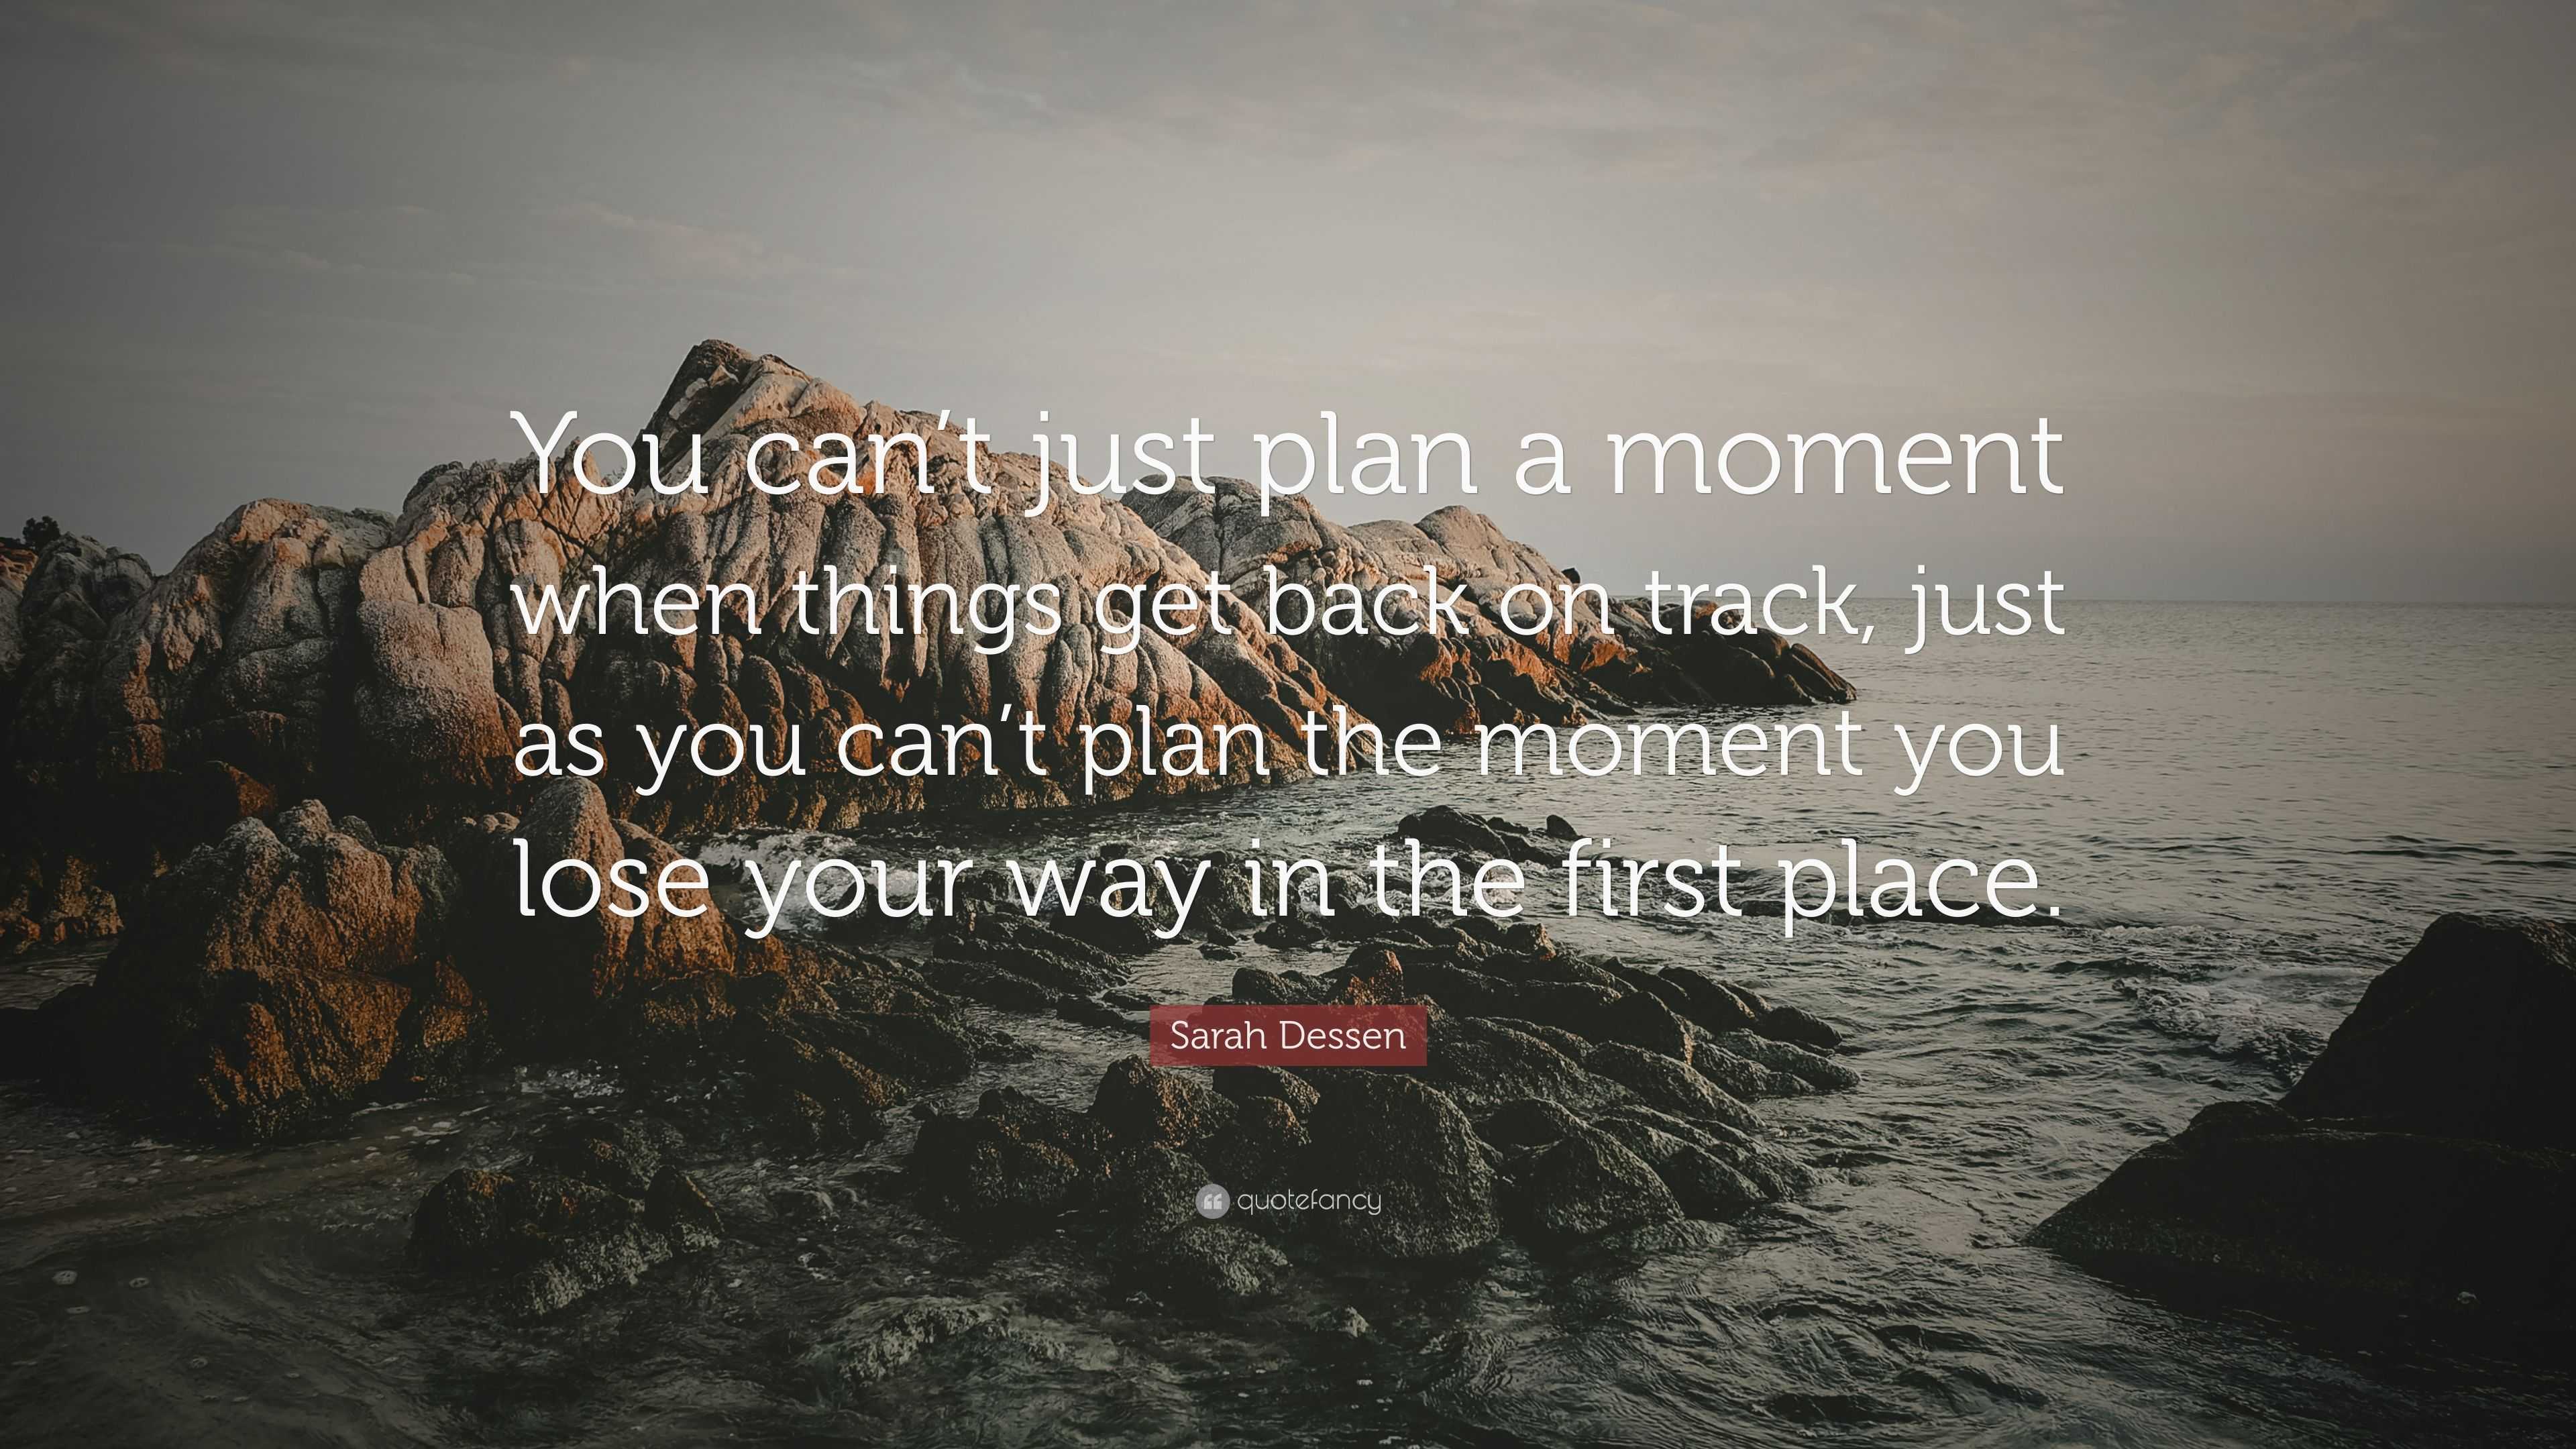 Sarah Dessen Quote You Can T Just Plan A Moment When Things Get Back On Track Just As You Can T Plan The Moment You Lose Your Way In The F 7 Wallpapers